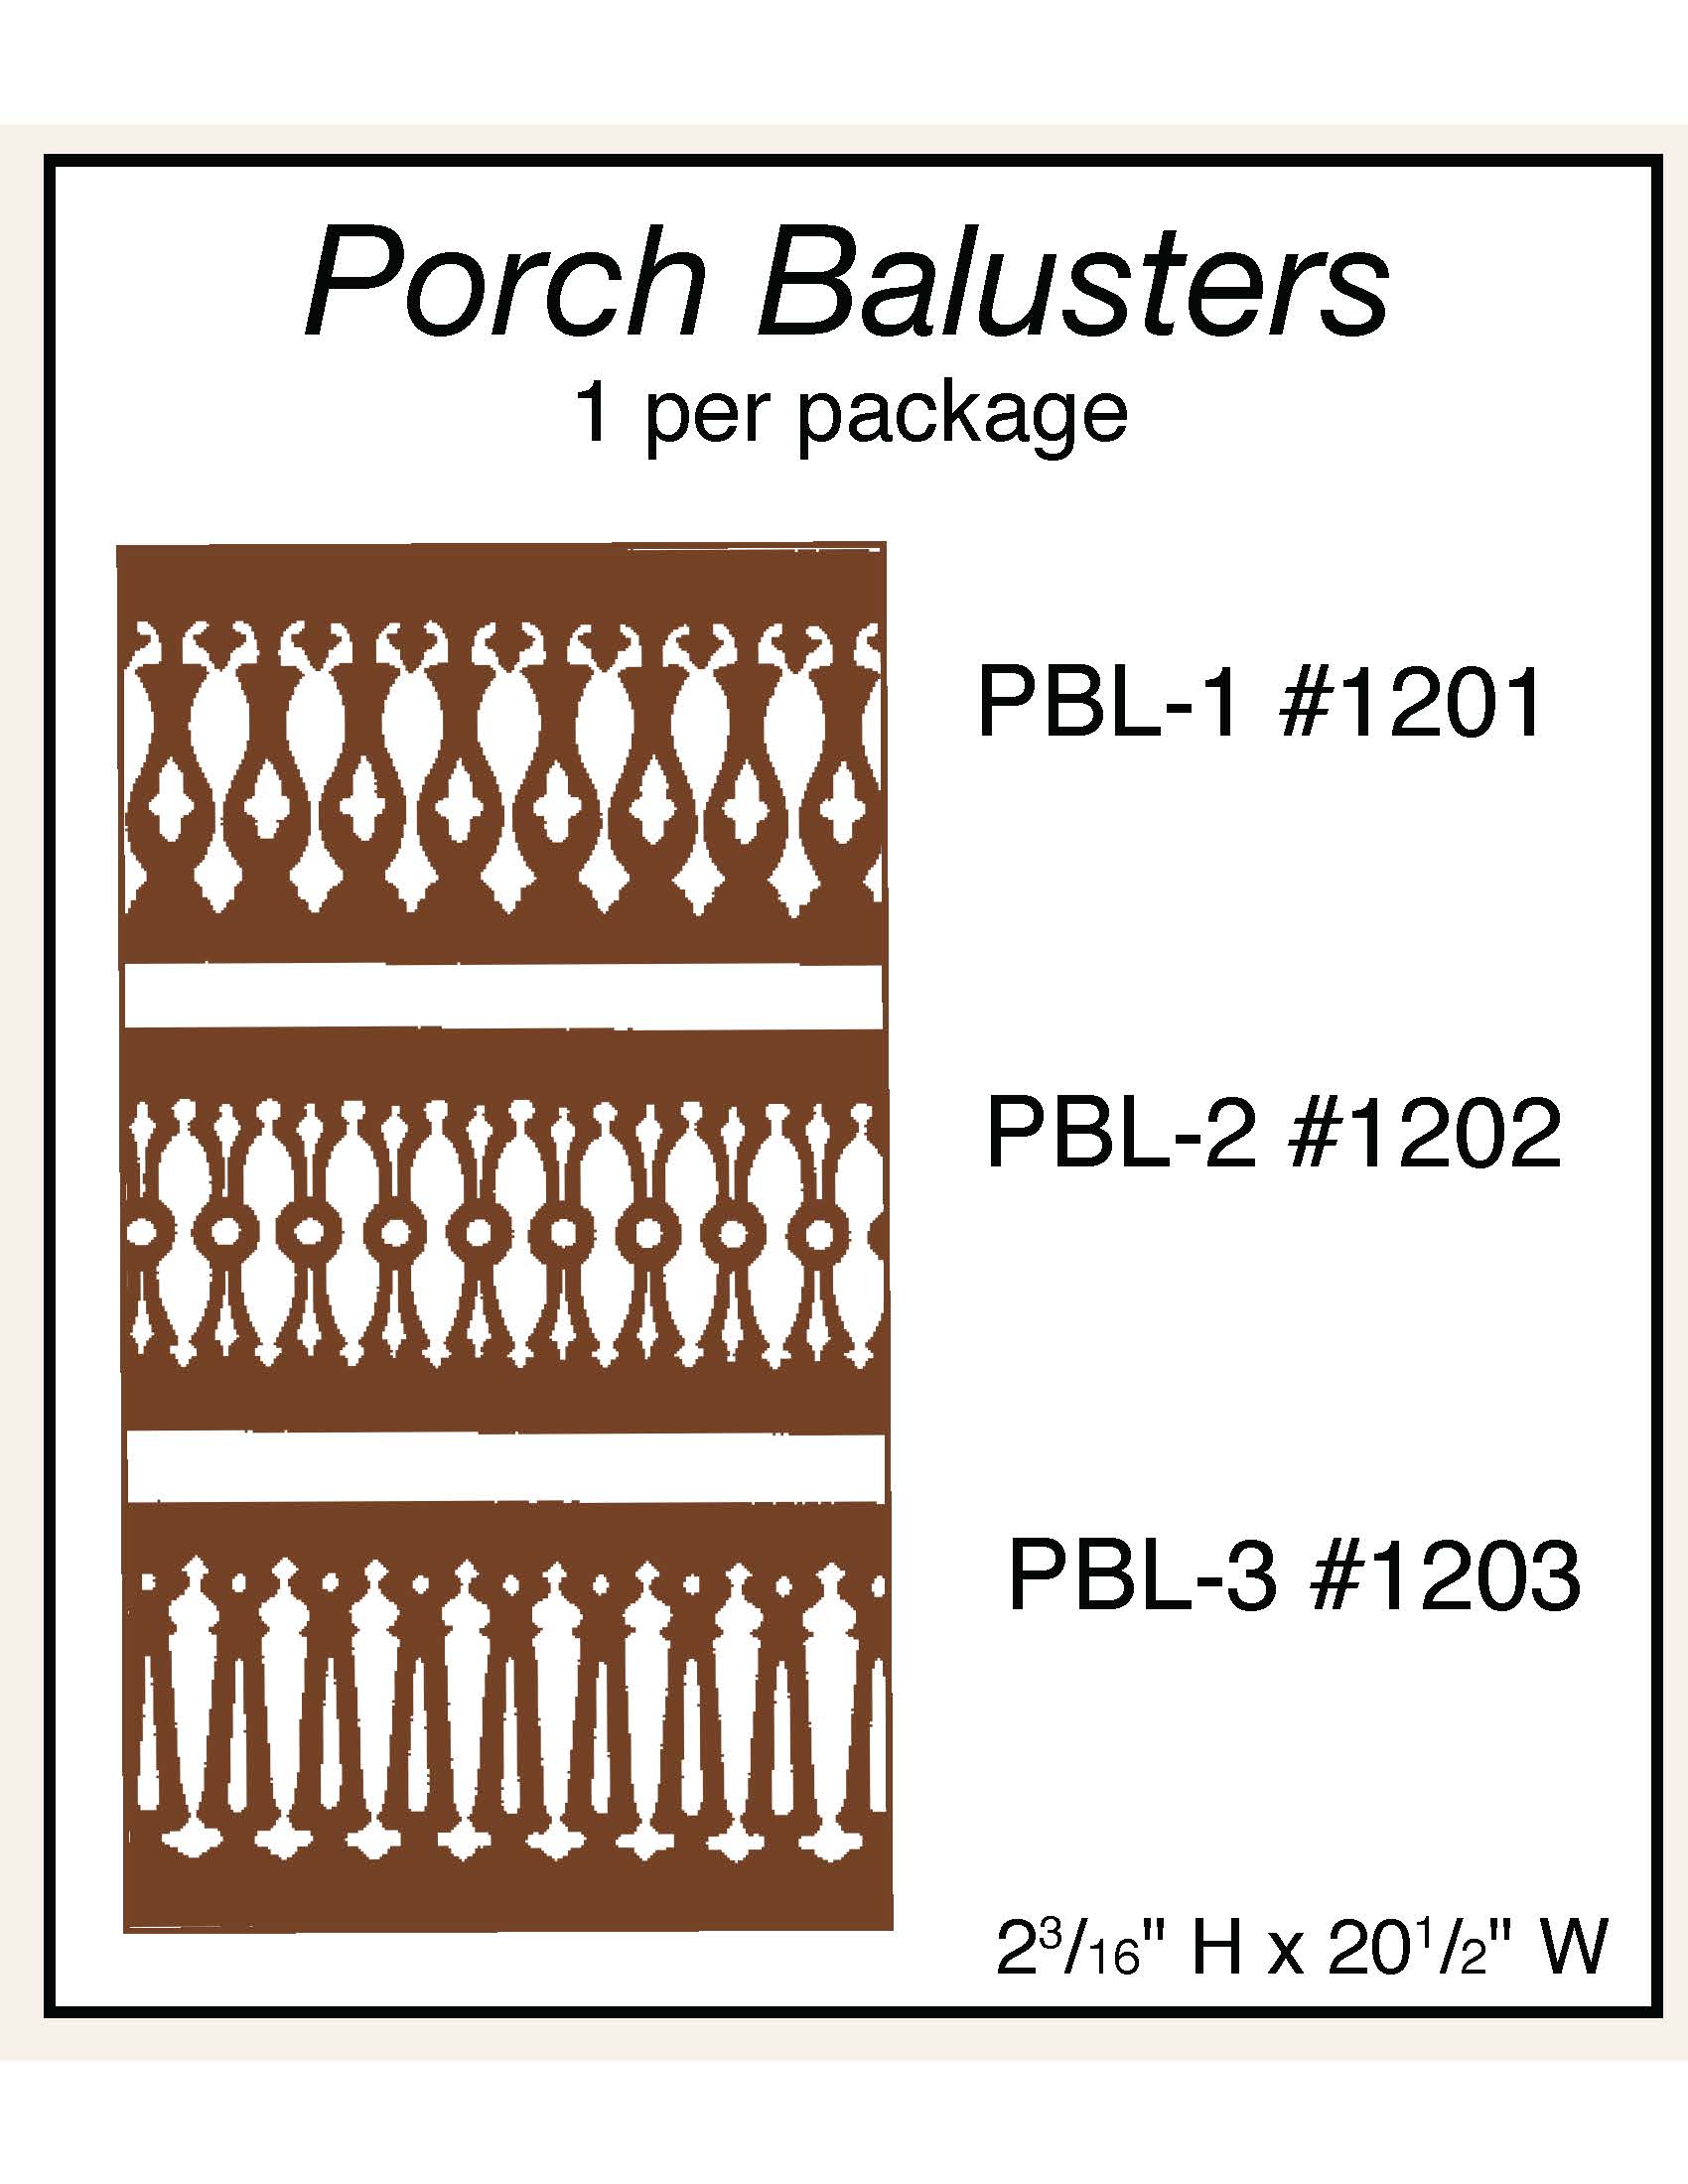 Porch Balusters